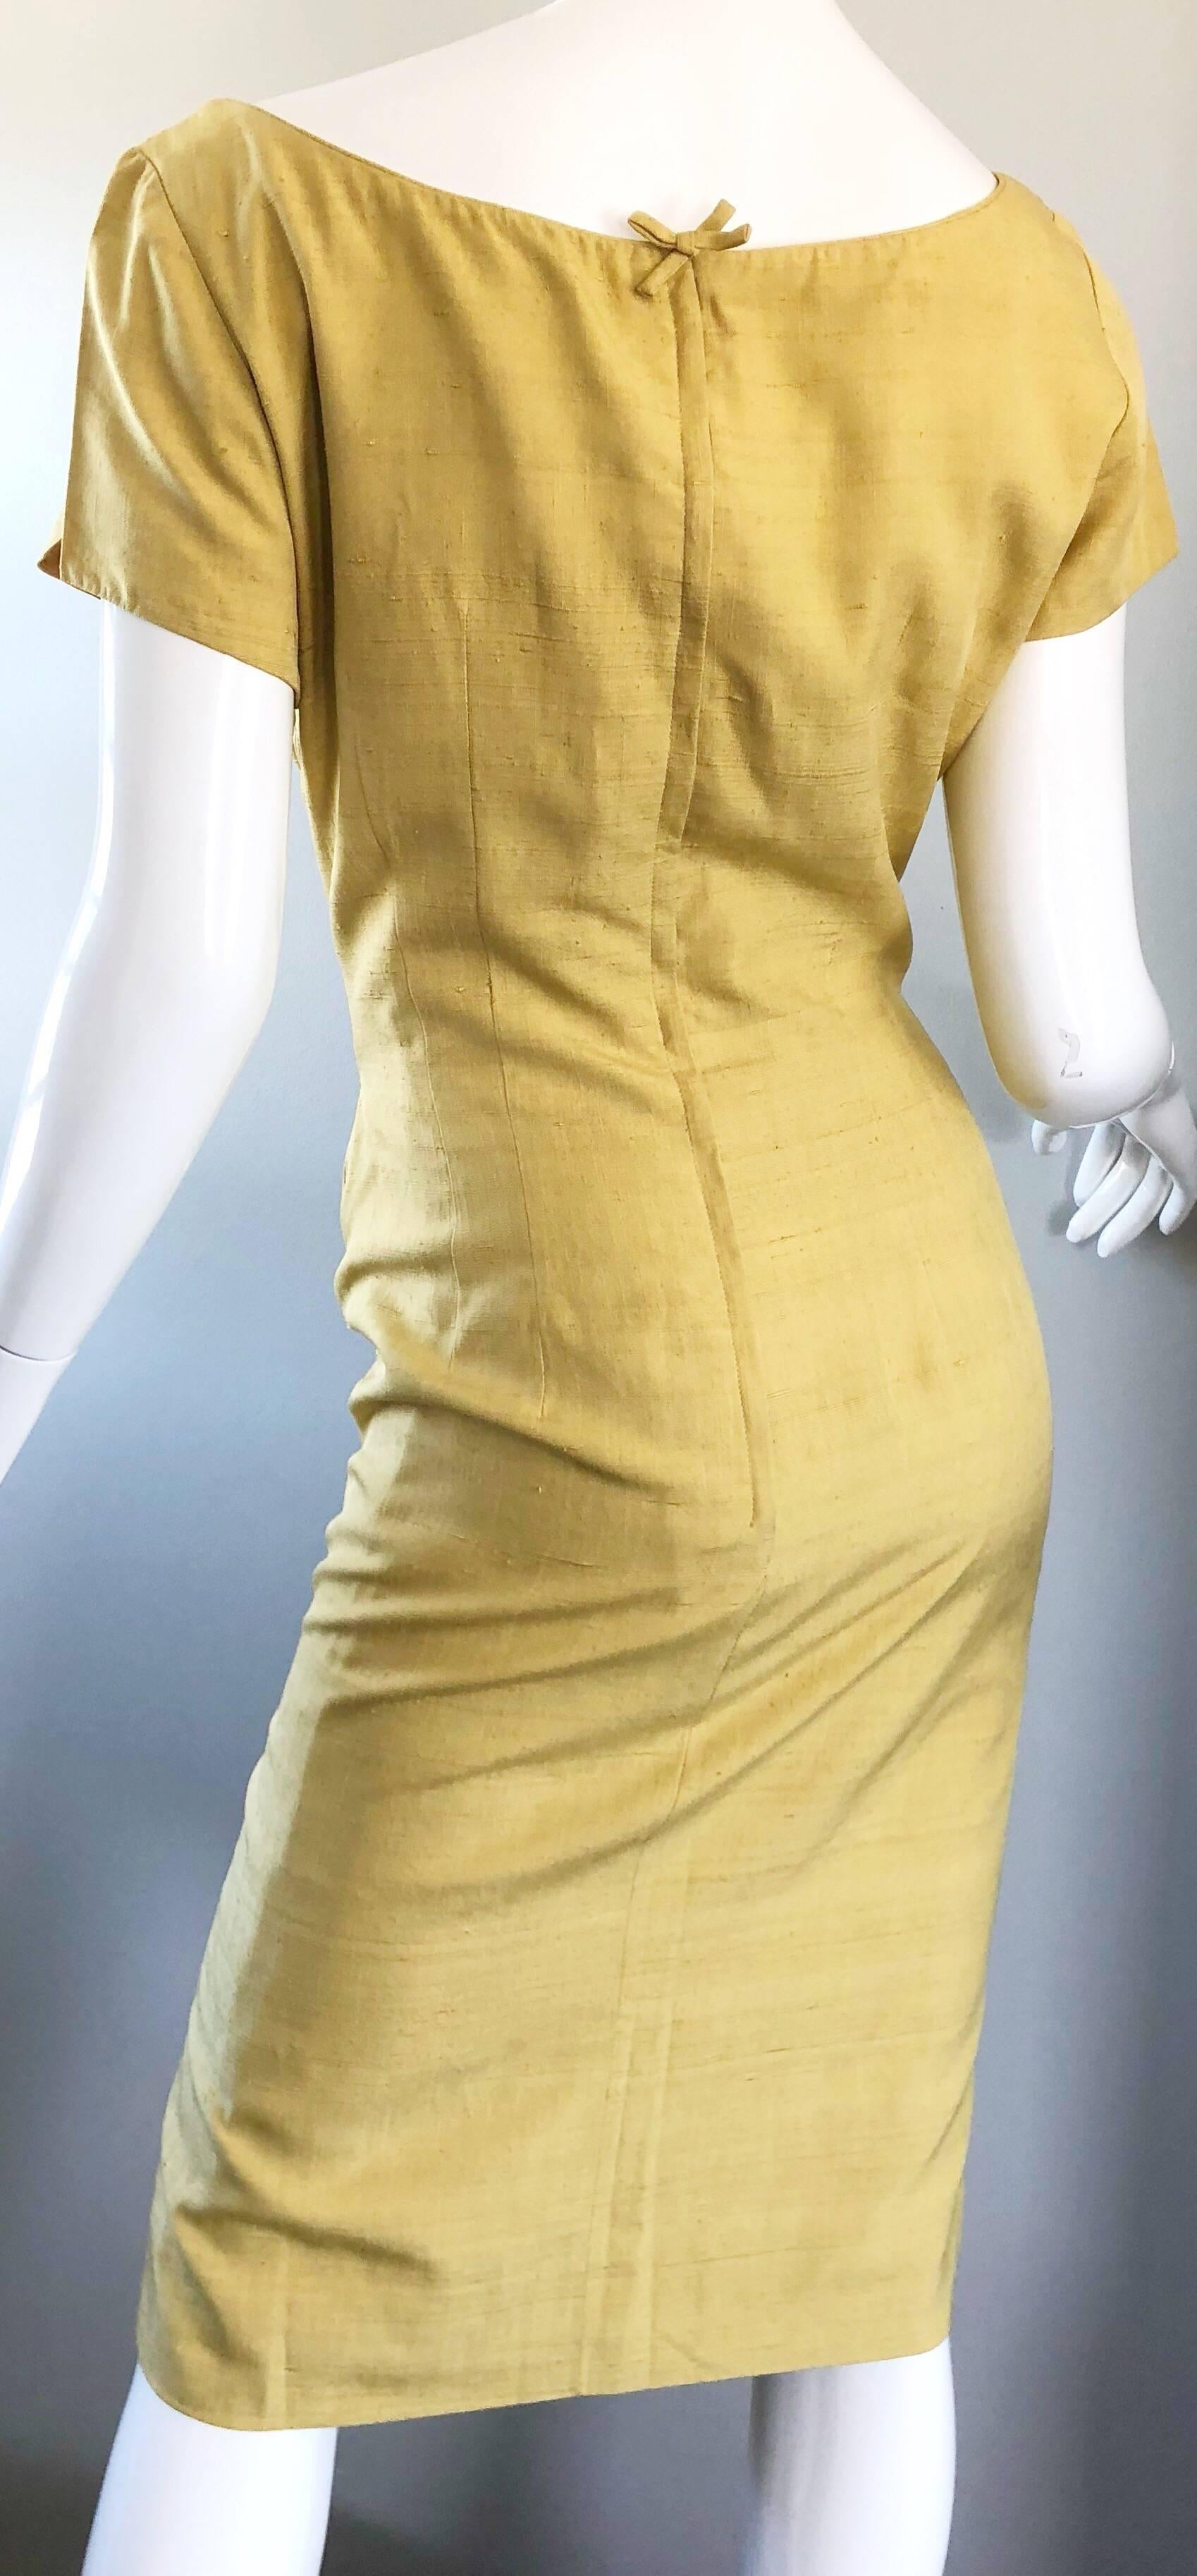 1950s Mr. Blackwell Current Size 10 / 12 Mustard Yellow Silk Vintage 50s Dress For Sale 4